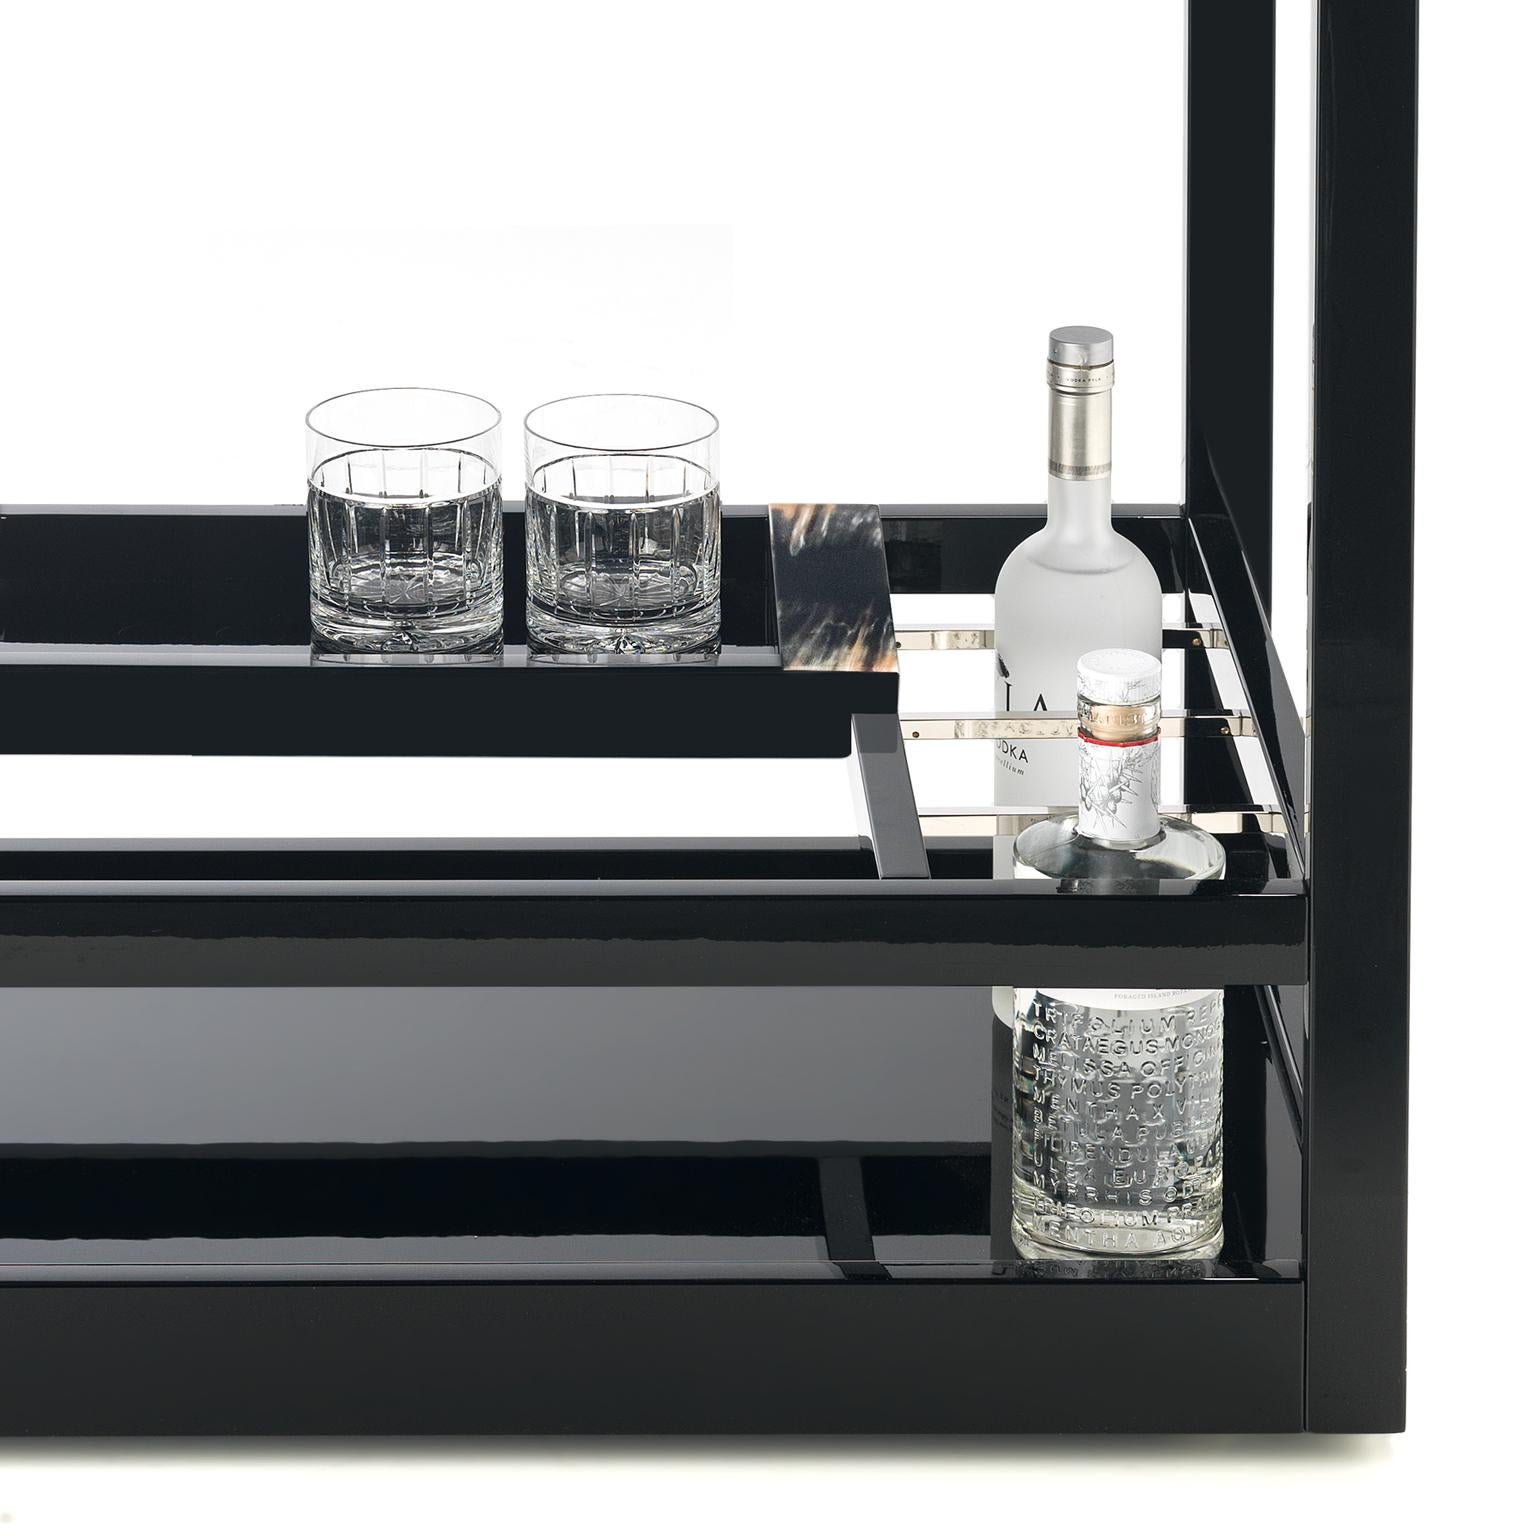 Hand-Crafted Elia Tray in Glossy Black Lacquered Wood and Corno Italiano, Mod. 4717 For Sale